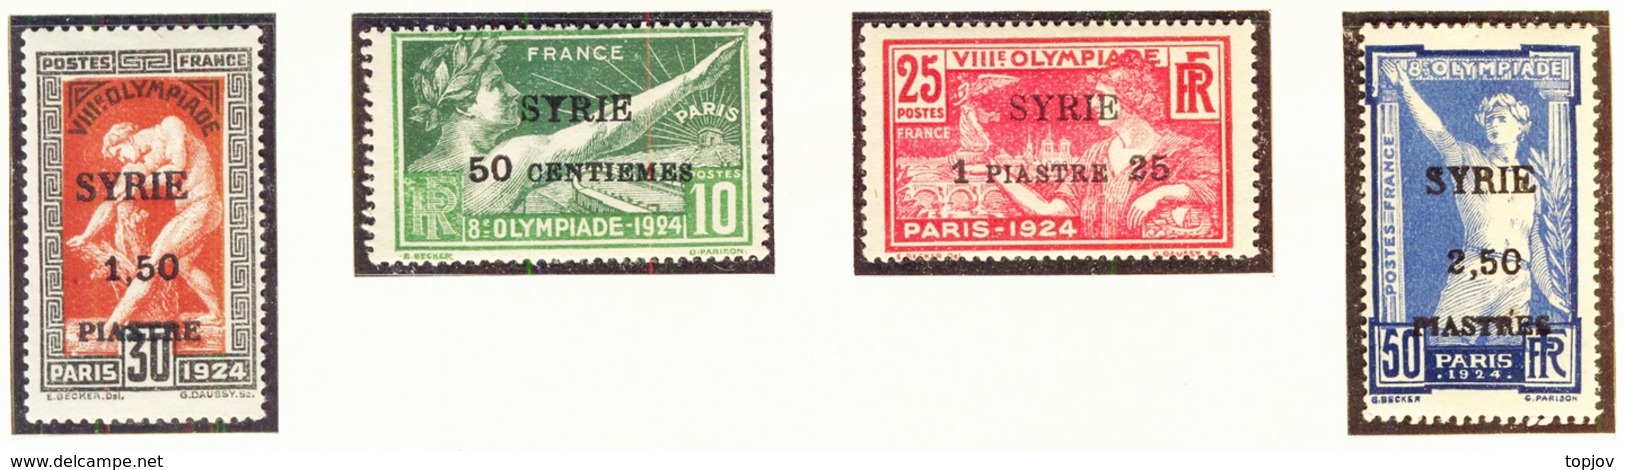 SYRIA - SYRIE -  OLYMPICS GAMES Ovp.  -MLH/MNH - 1924 - Estate 1924: Paris